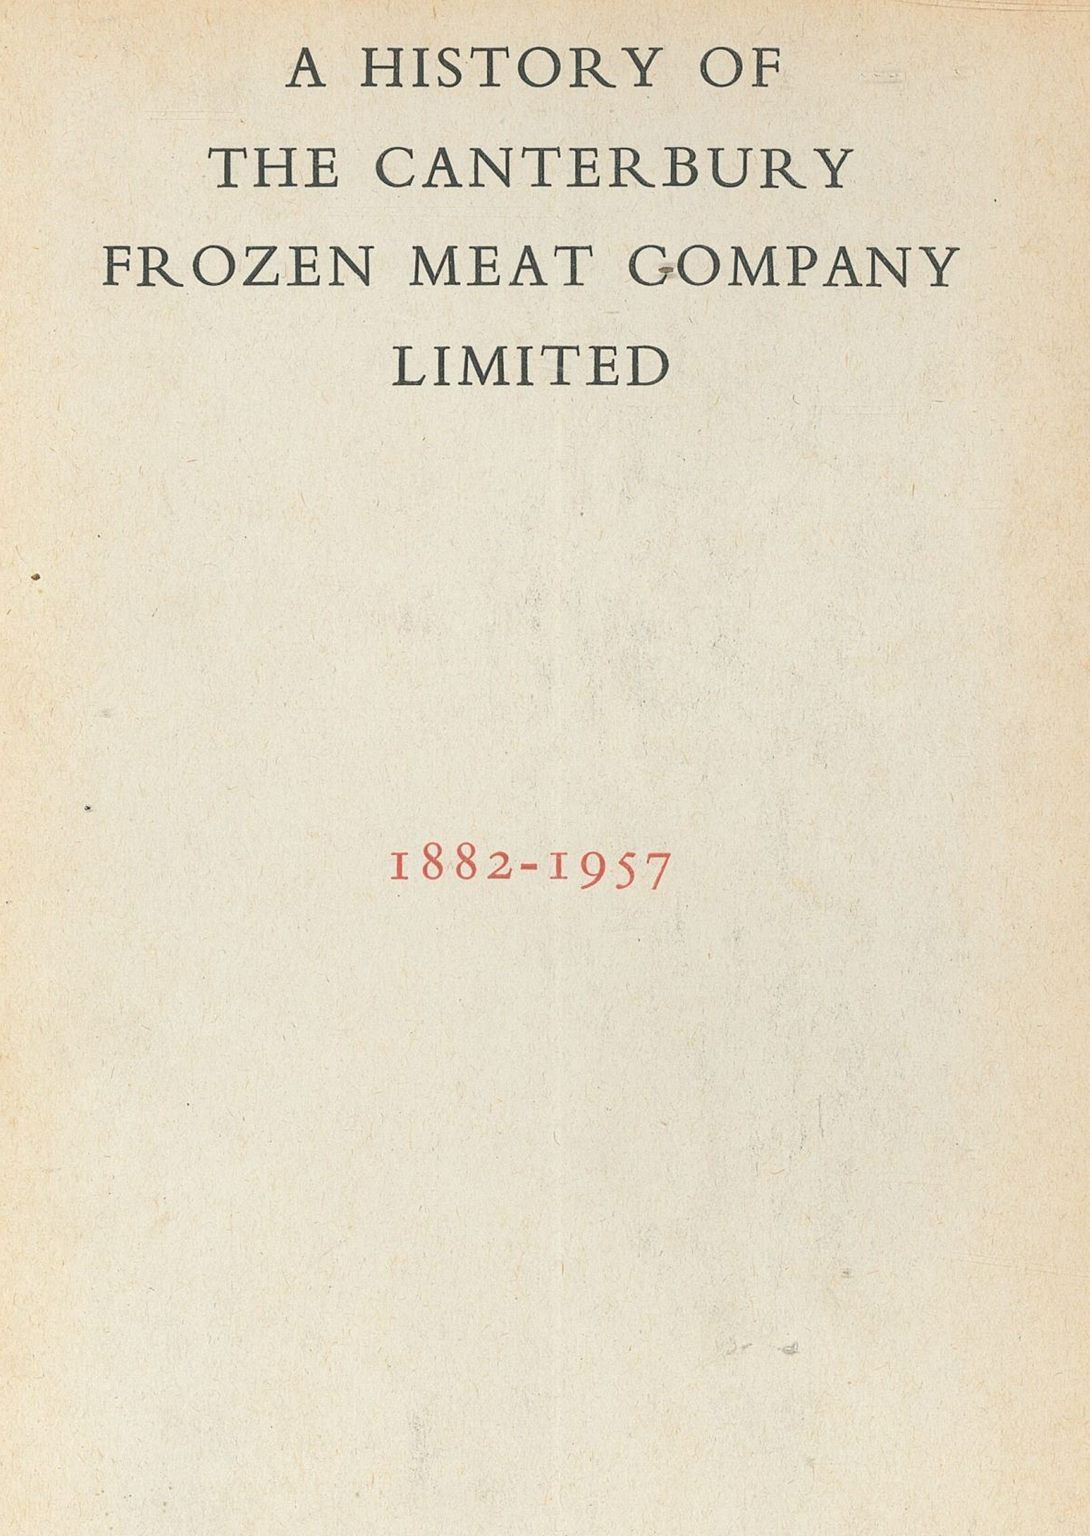 A HISTORY OF THE CANTERBURY FROZEN MEAT COMPANY LIMITED 1882-1957